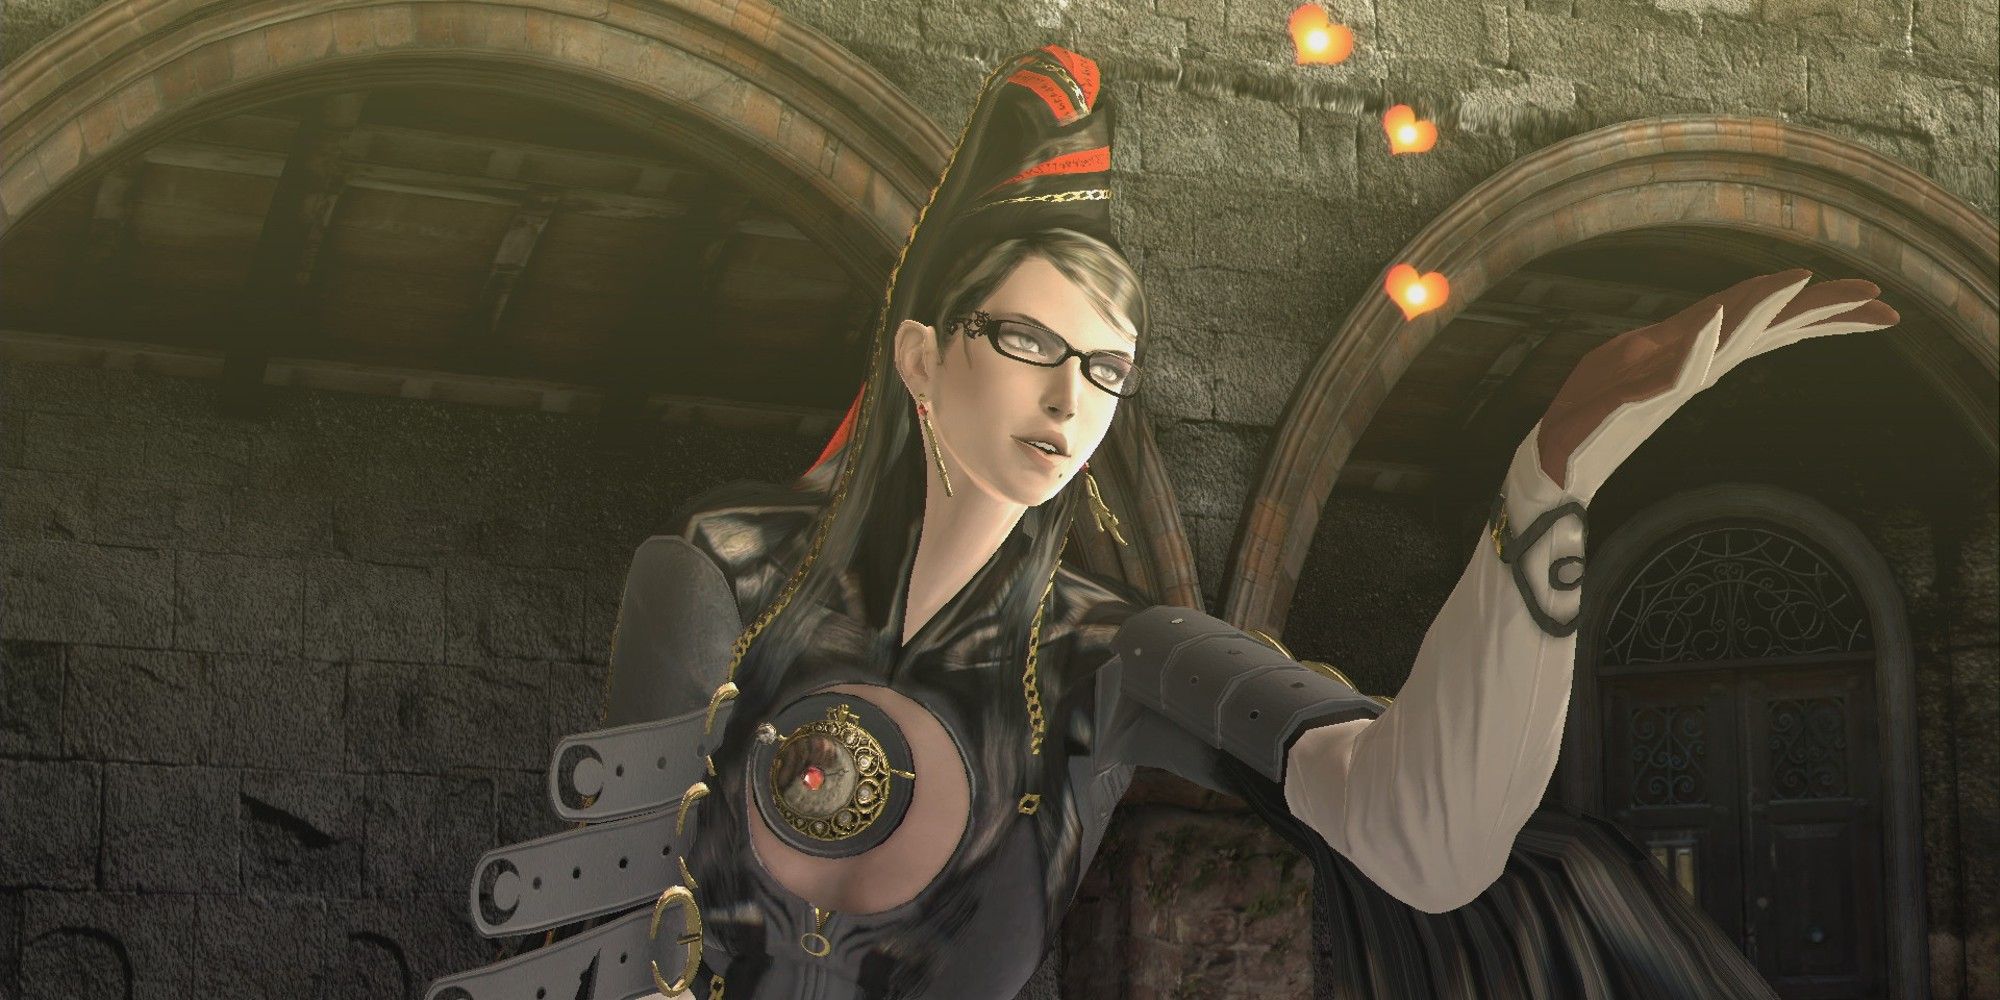 bayonetta blowing a kiss after completing a verse